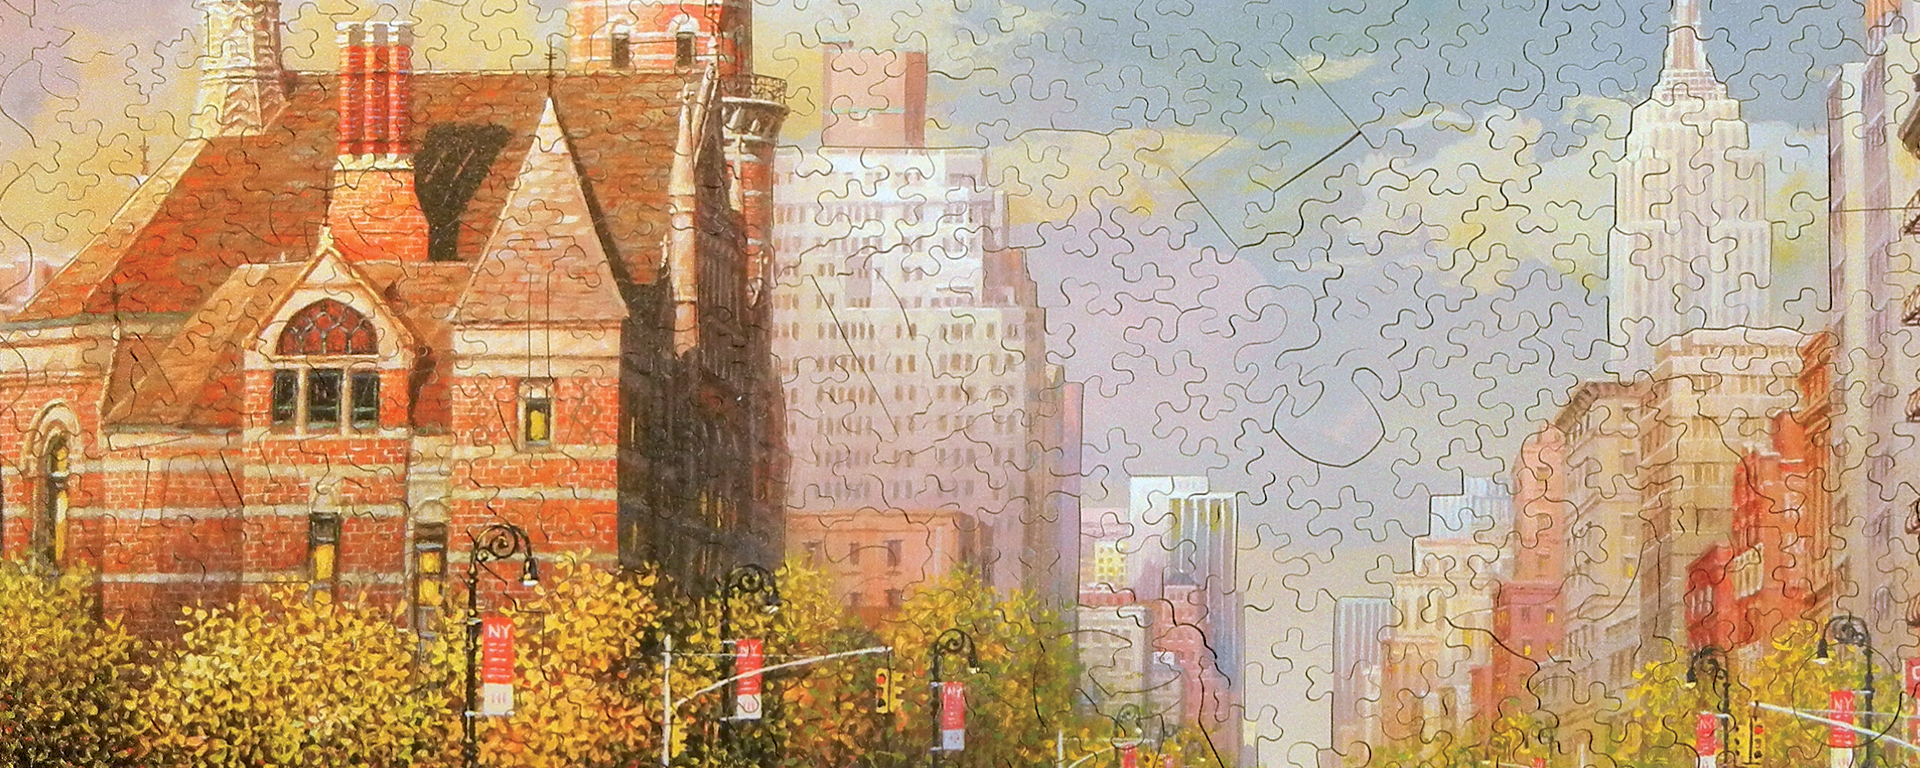 Wooden New York puzzle featuring the different buildings along a busy street in the city.